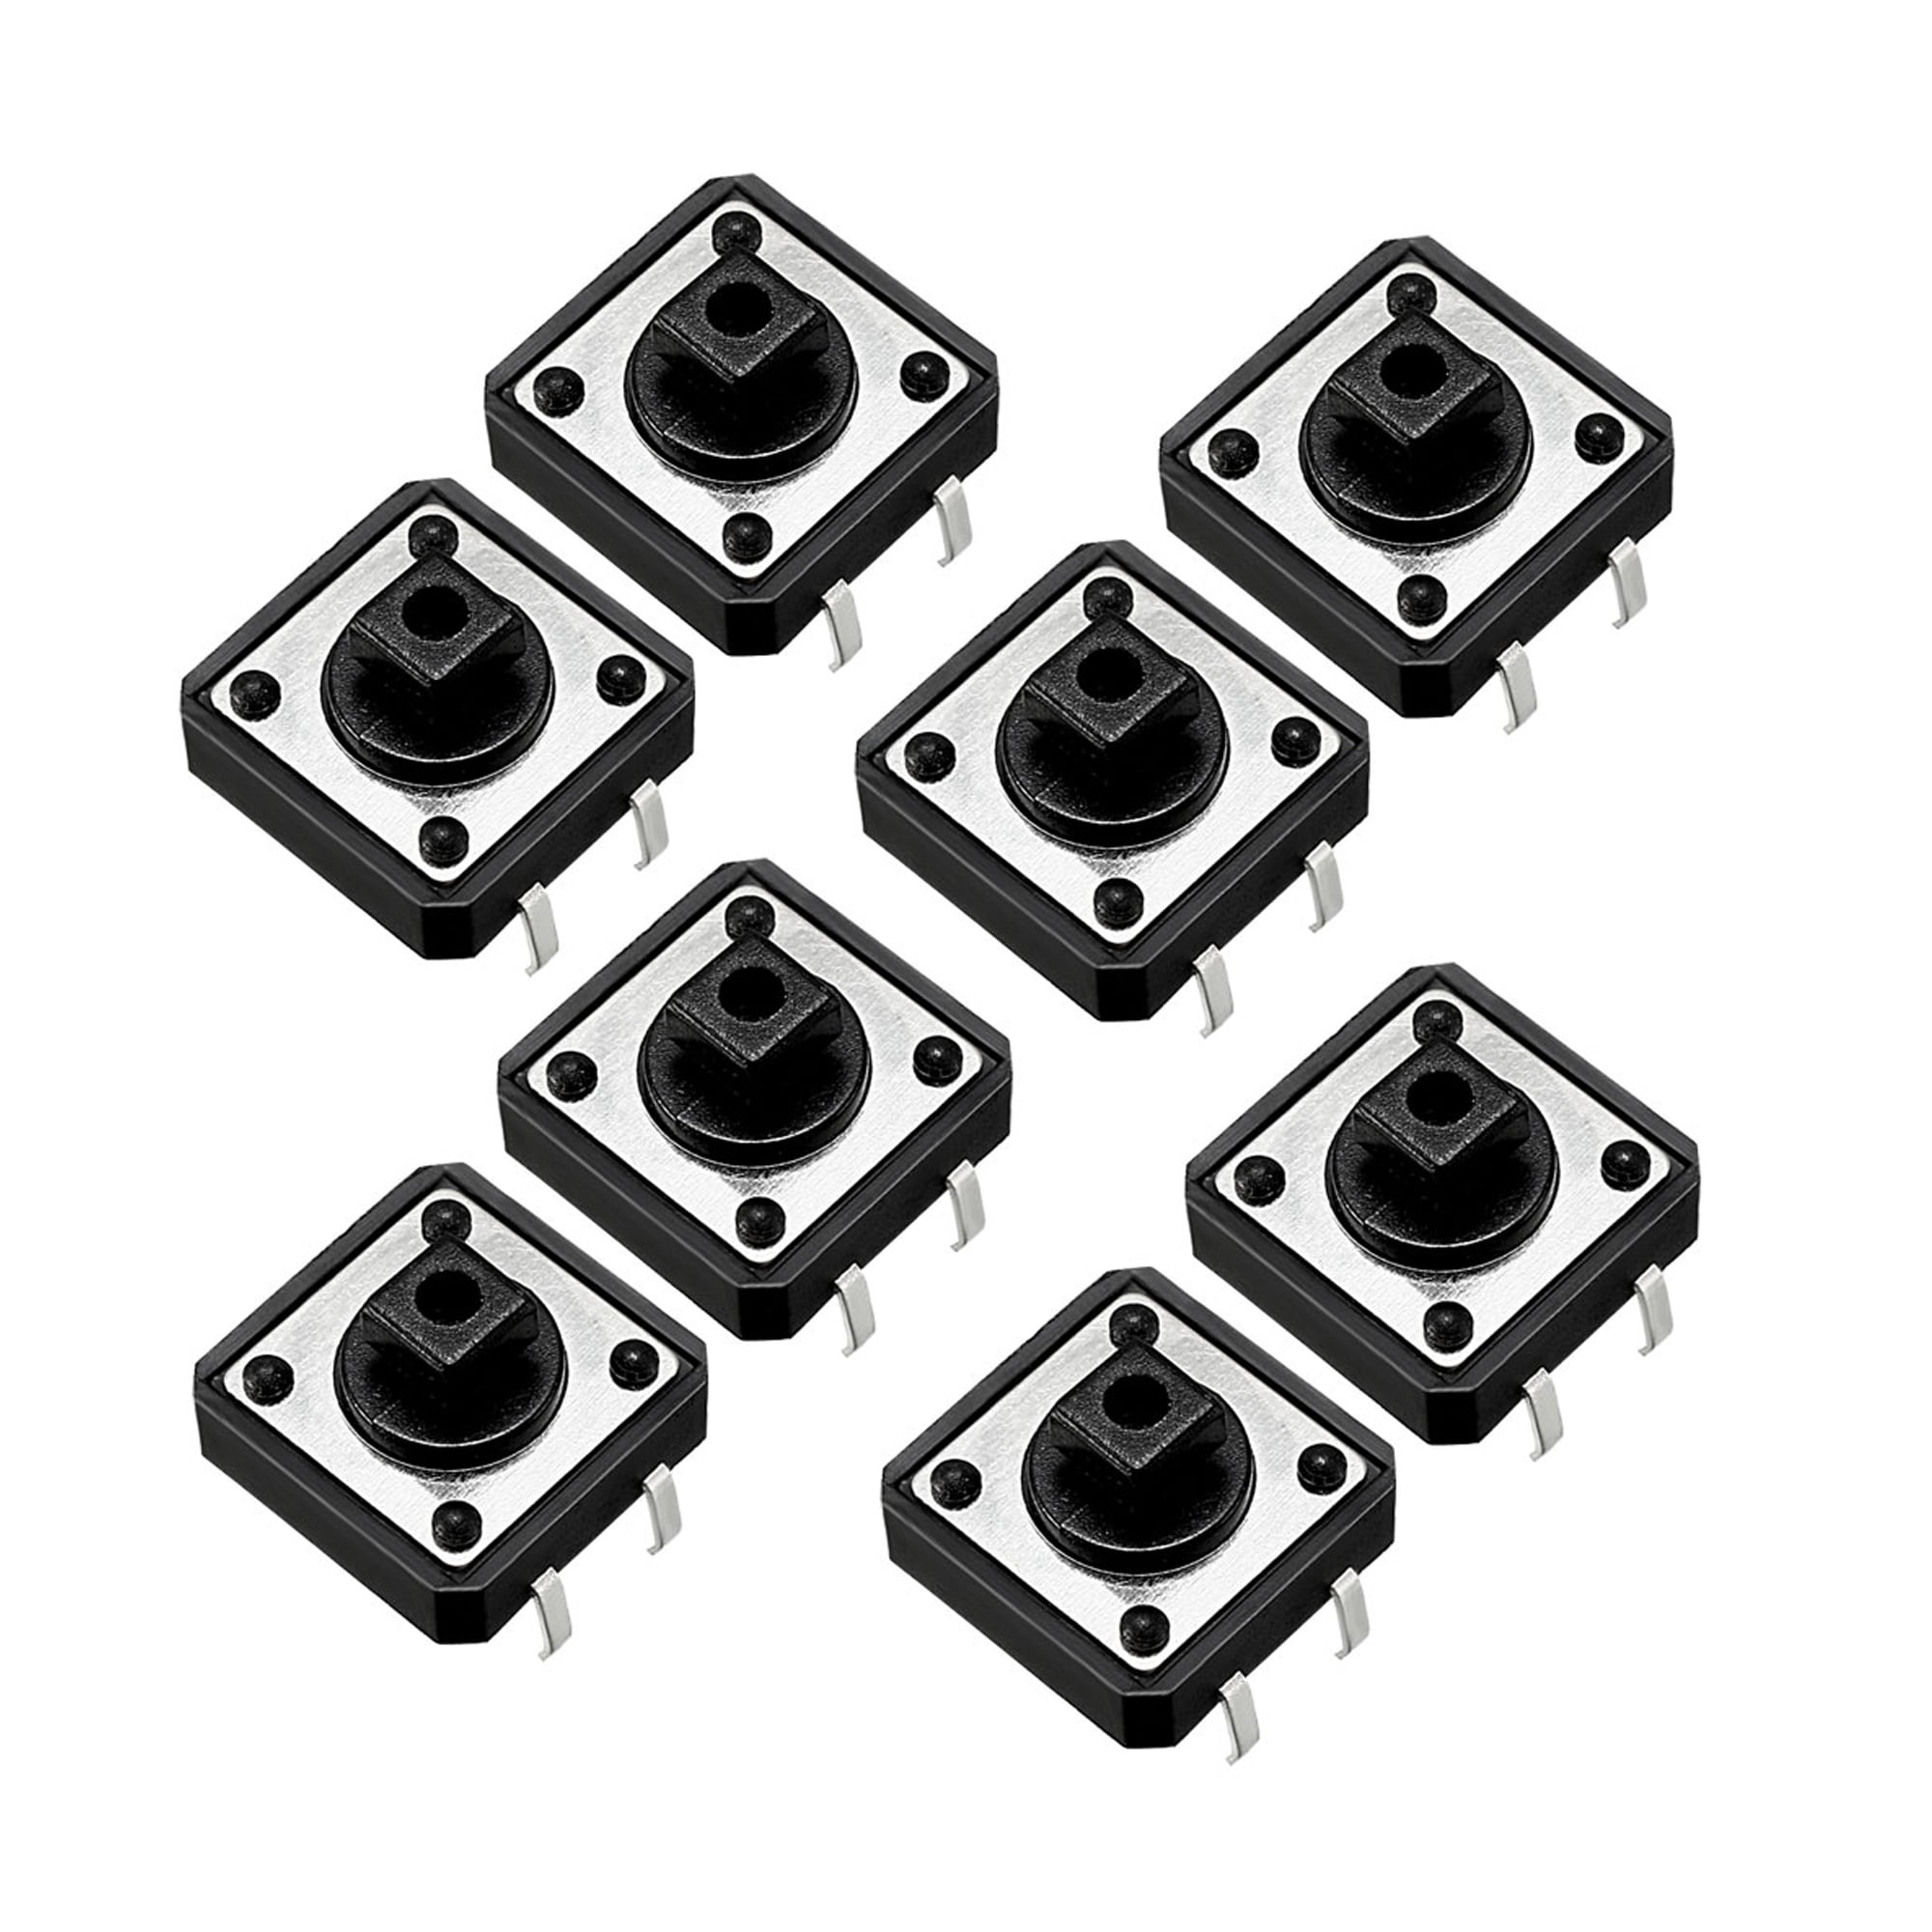 10 x 12x12x5mm Momentary Push Button Tactile Switch PCB Mounted SPST